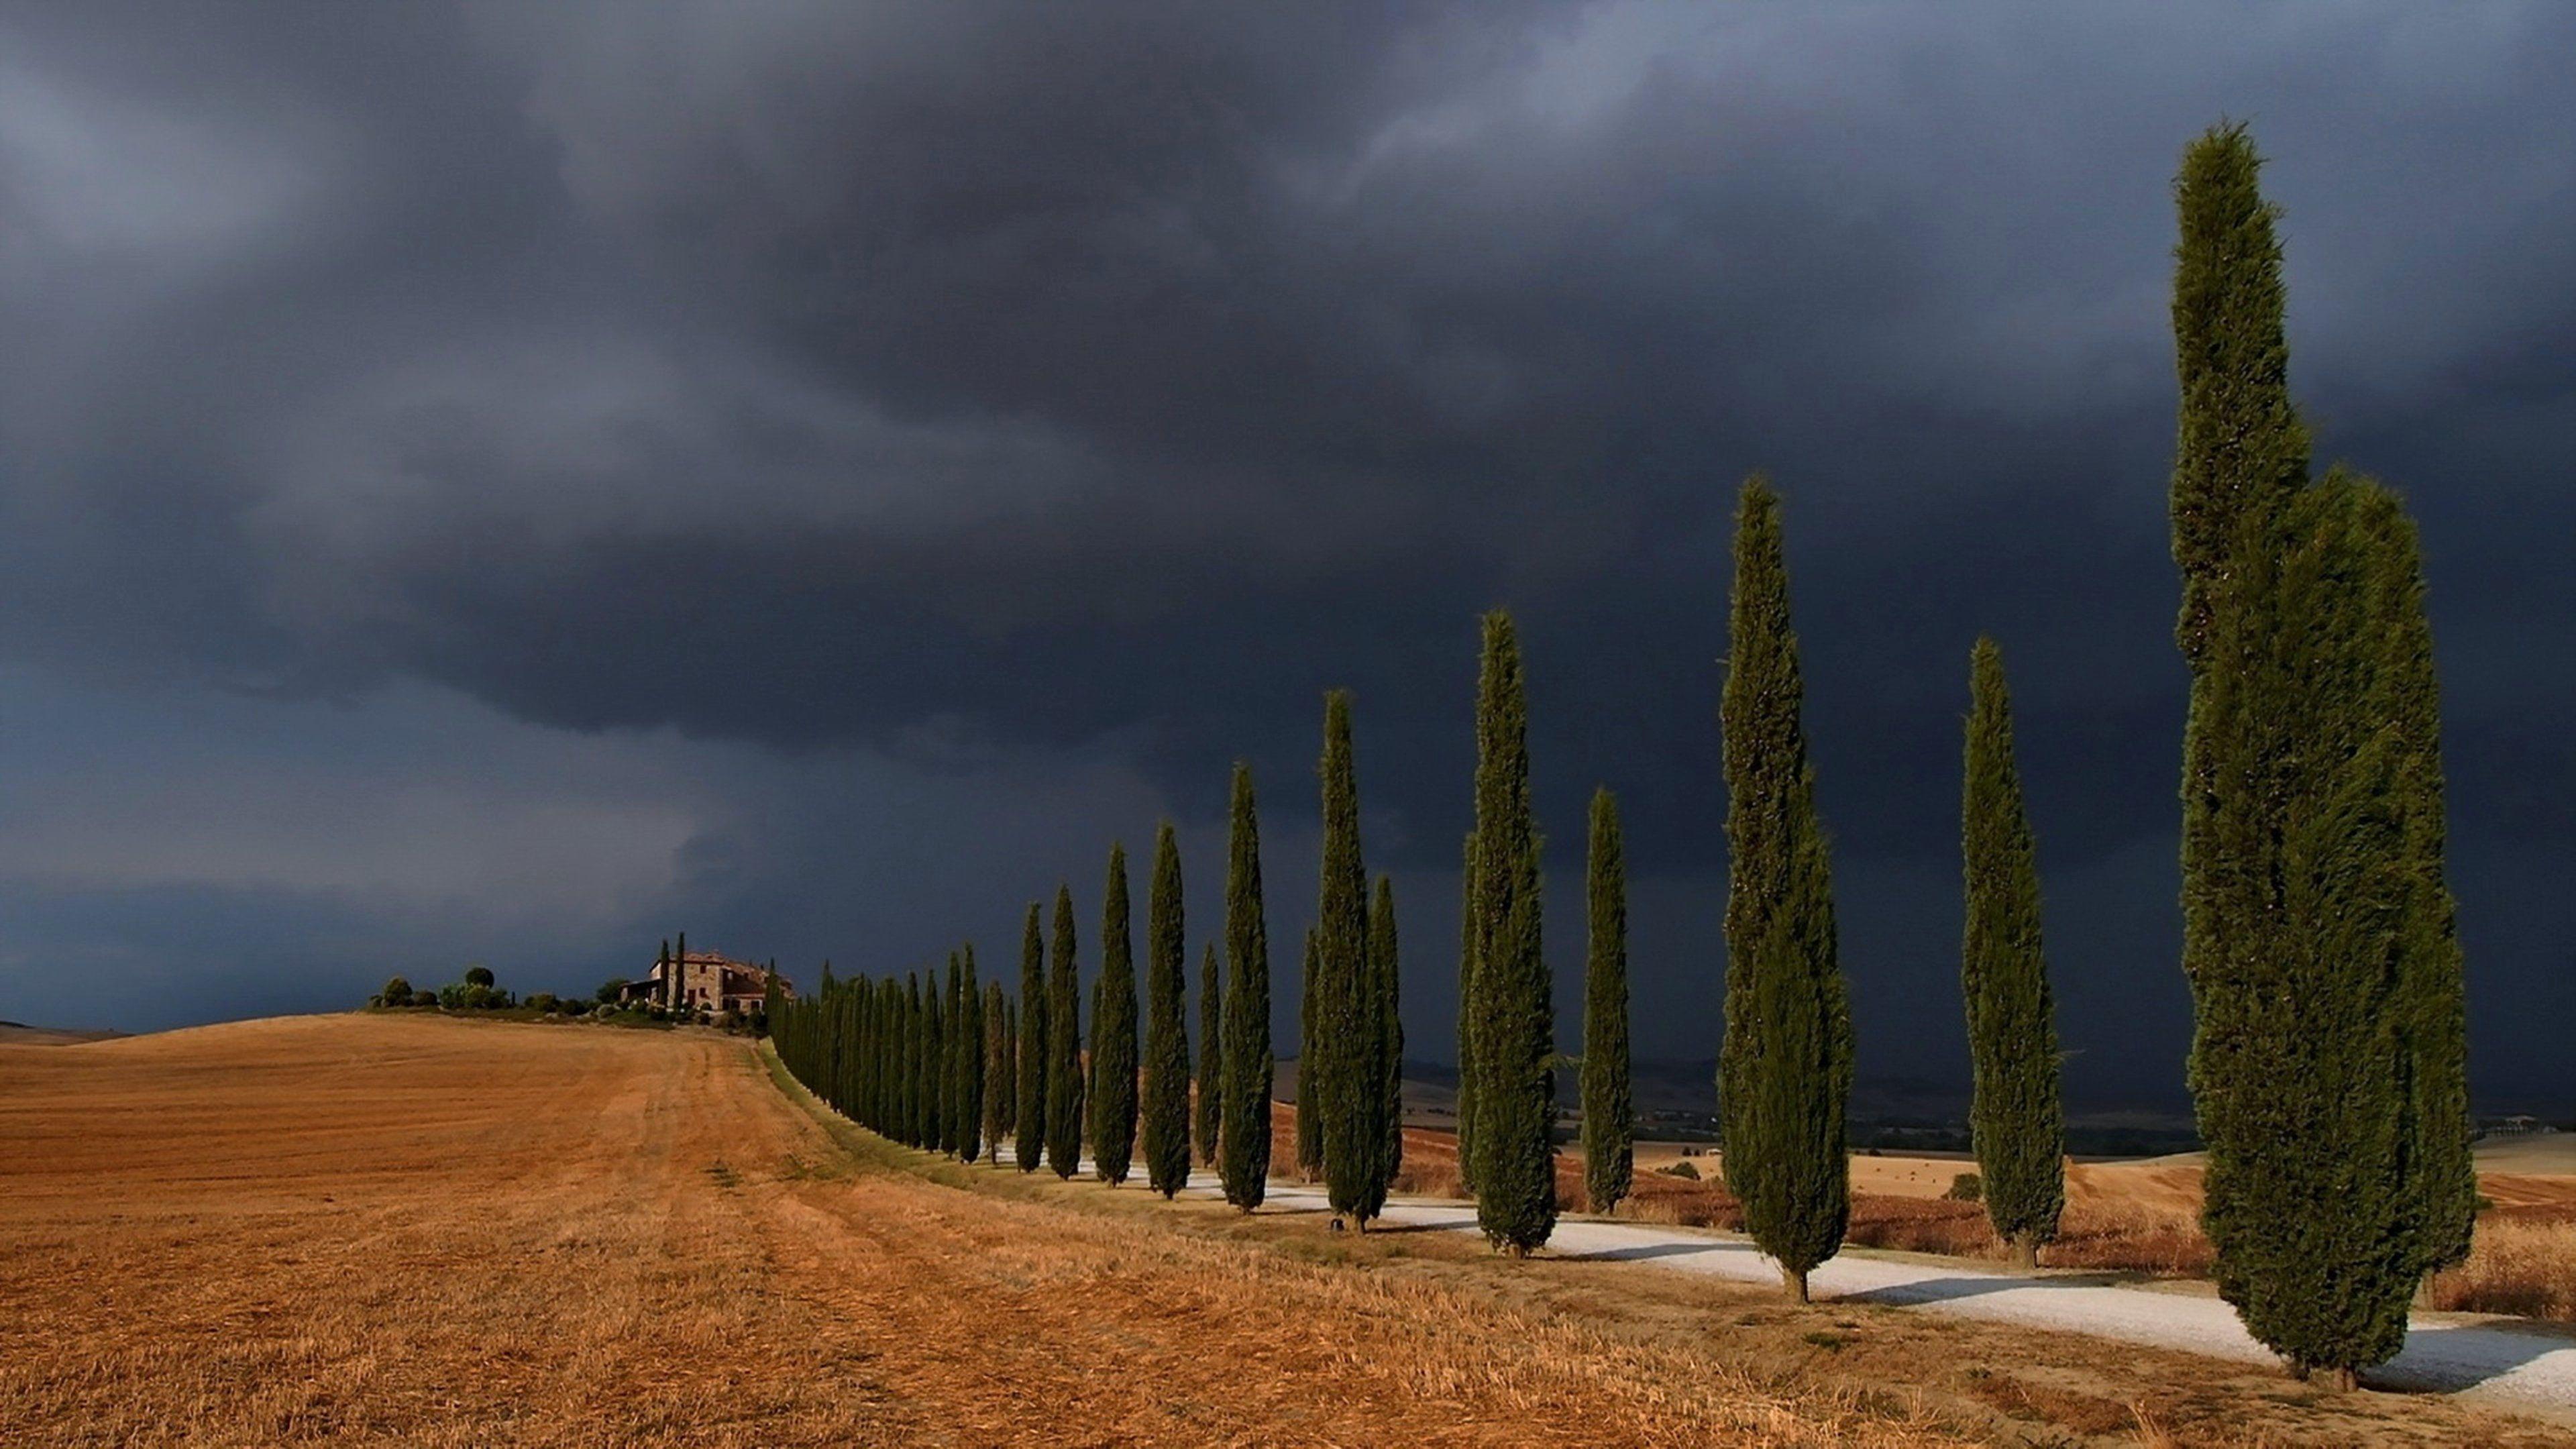 Storm Val d&;orcia trees road sky landscape nature fields clouds